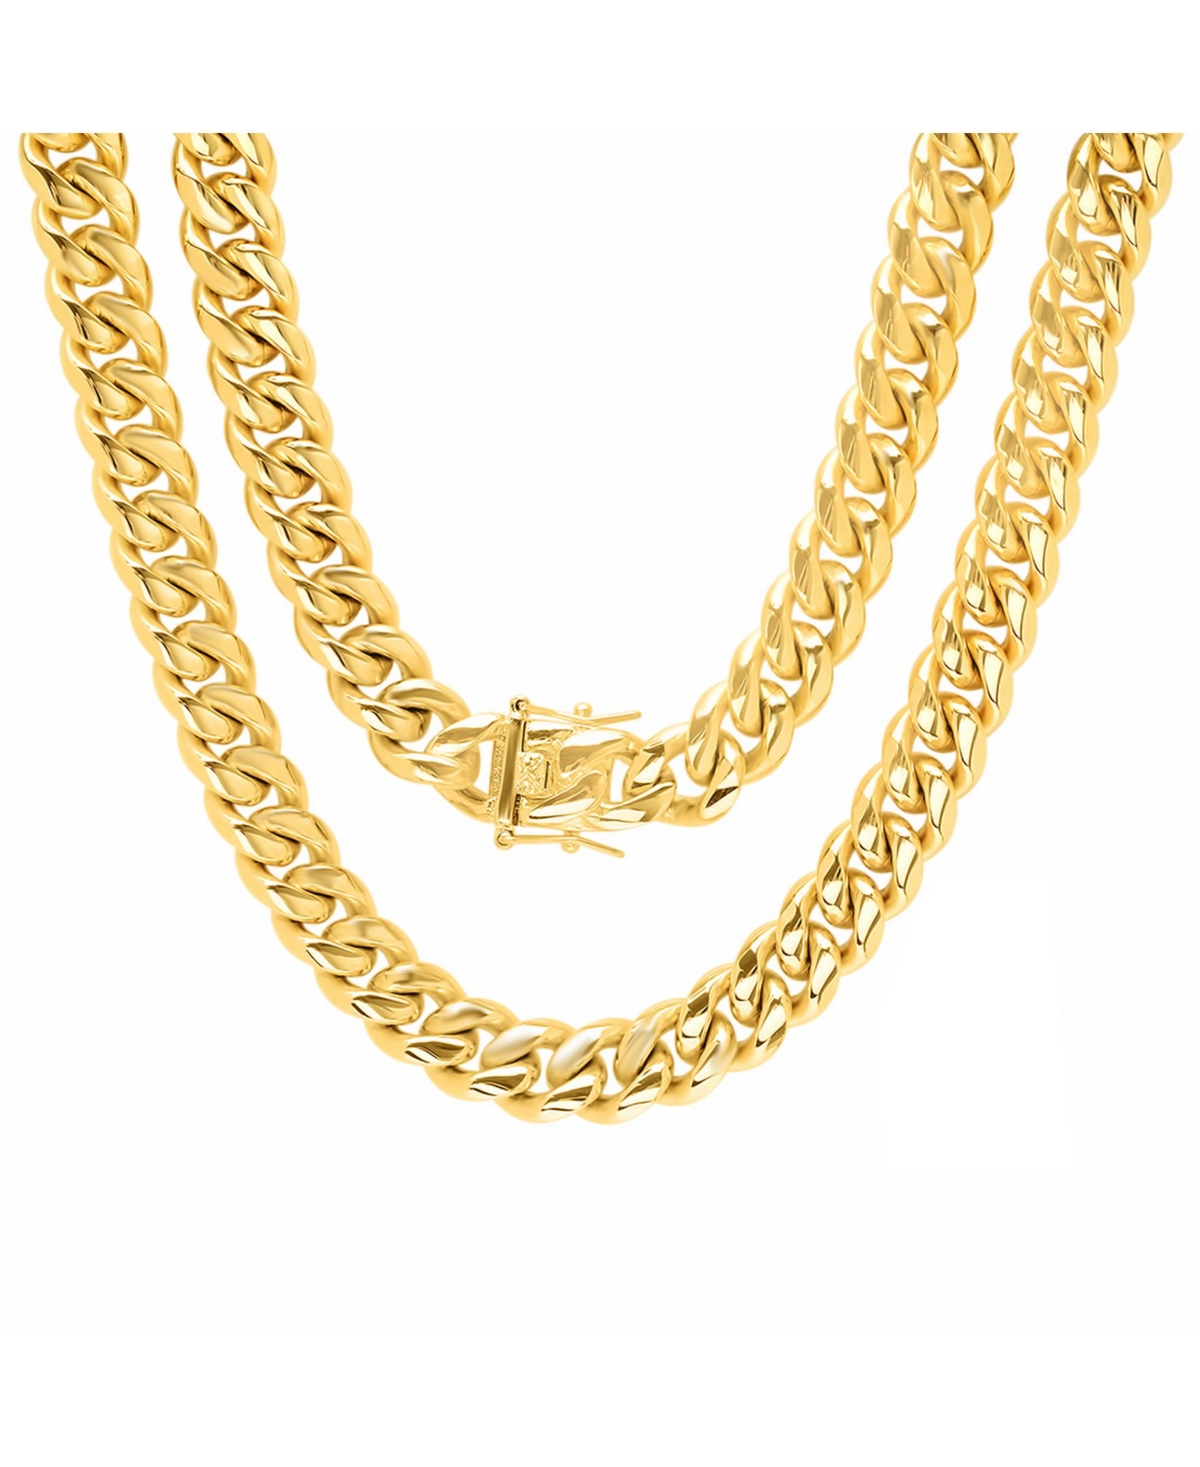 Men's 18k gold Plated Stainless Steel 24" Miami Cuban Link Chain with 12mm Box Clasp Necklaces - Gold